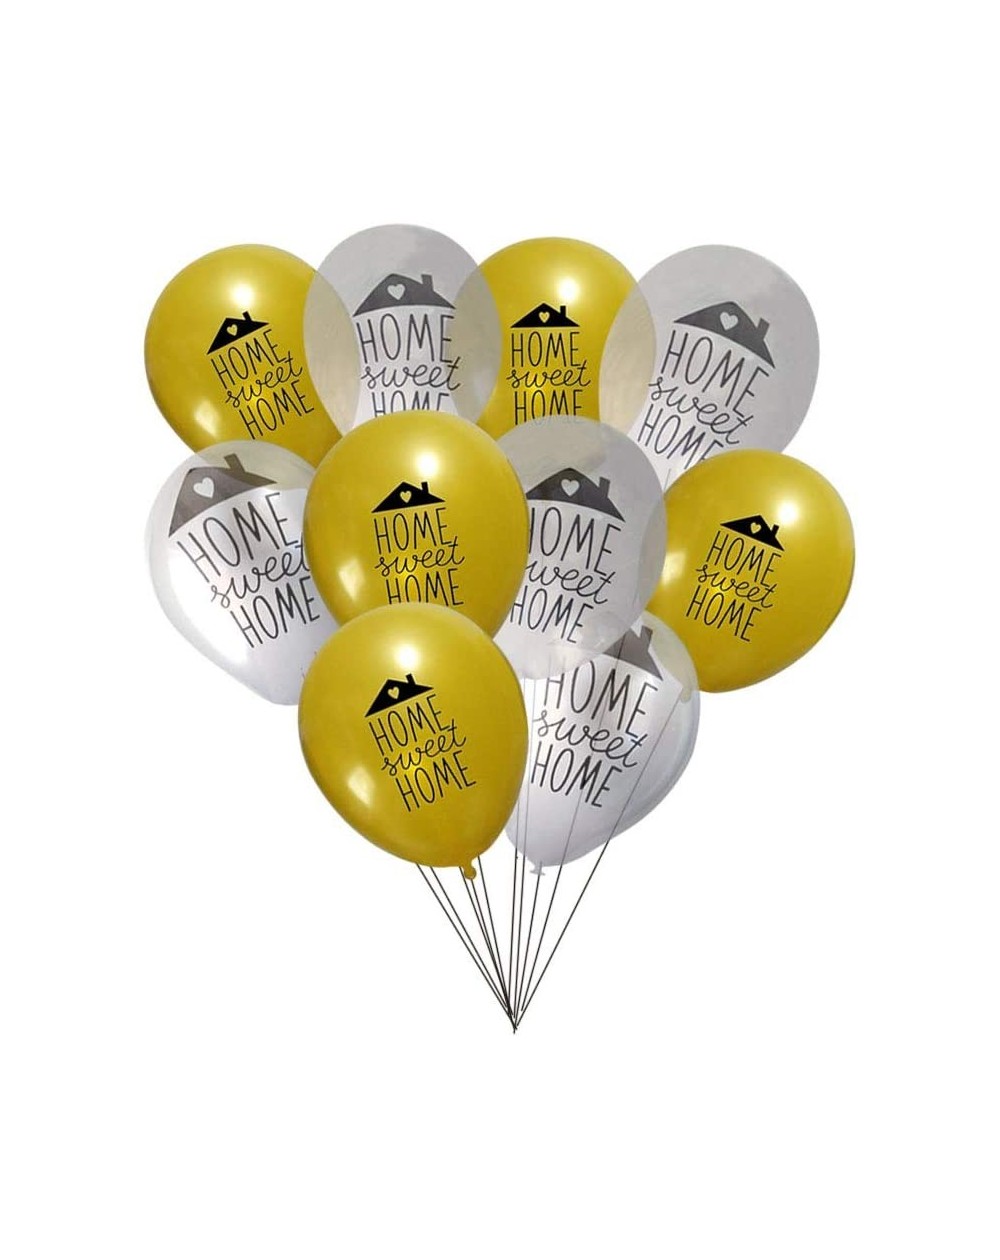 Balloons Home Sweet Home Party Balloons 11 inch Latex 10ct - C118RS8TWAW $15.40